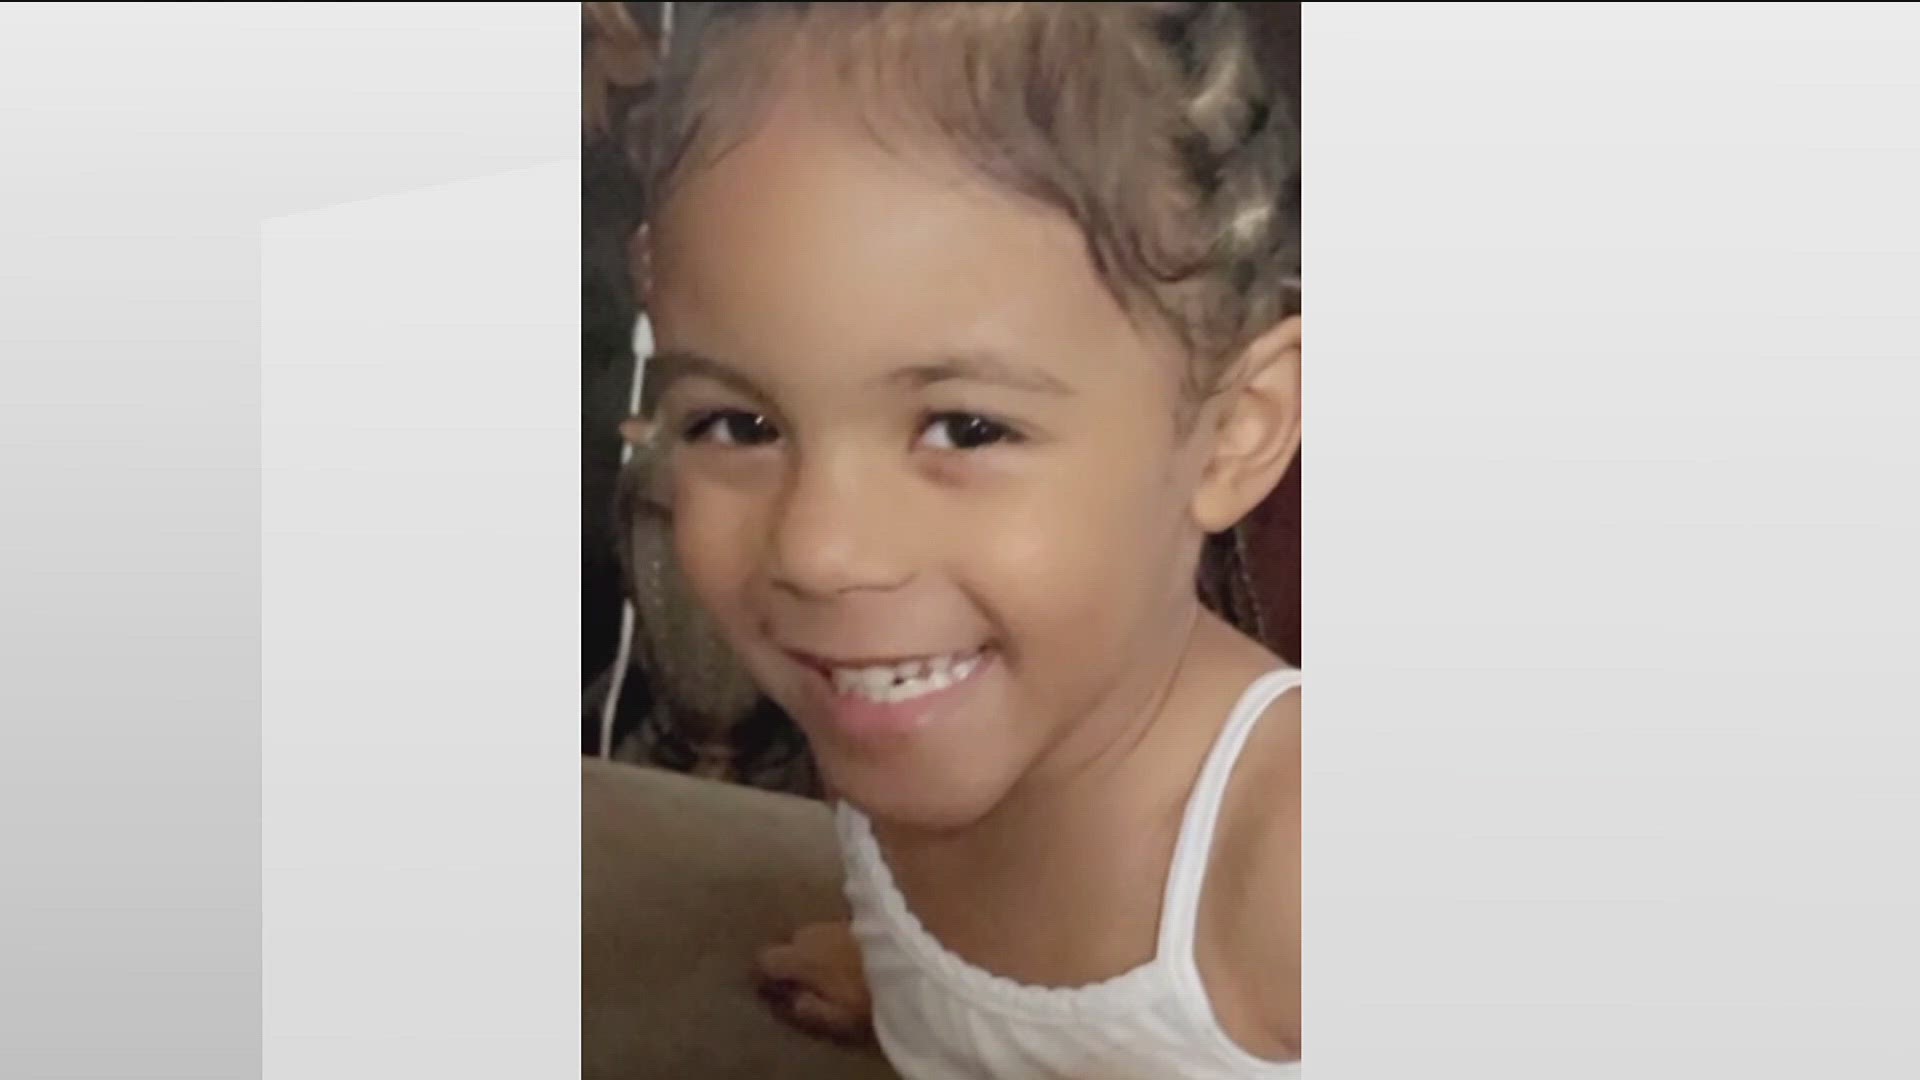 Arielle Jackson suffered severe burns that fractured part of her skull, the autopsy revealed.